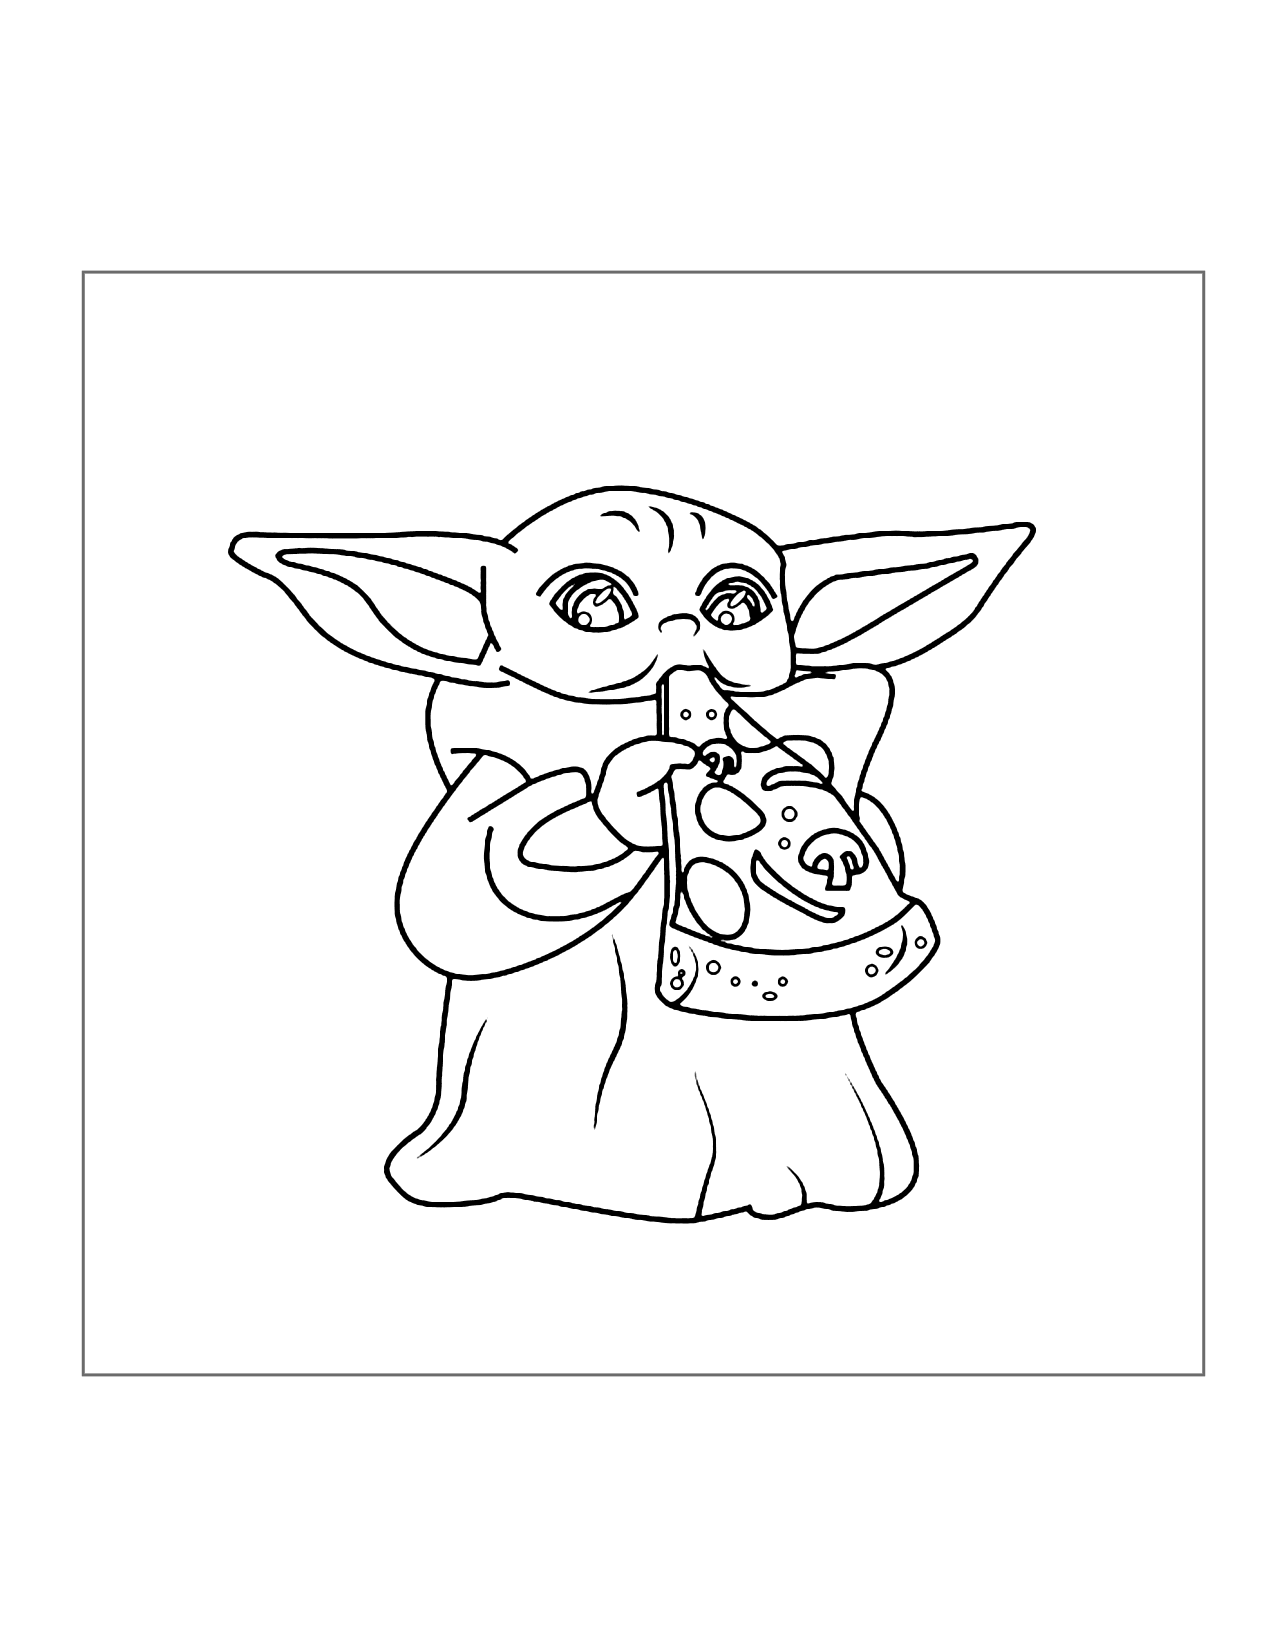 Grogu Loves Pizza Coloring Page